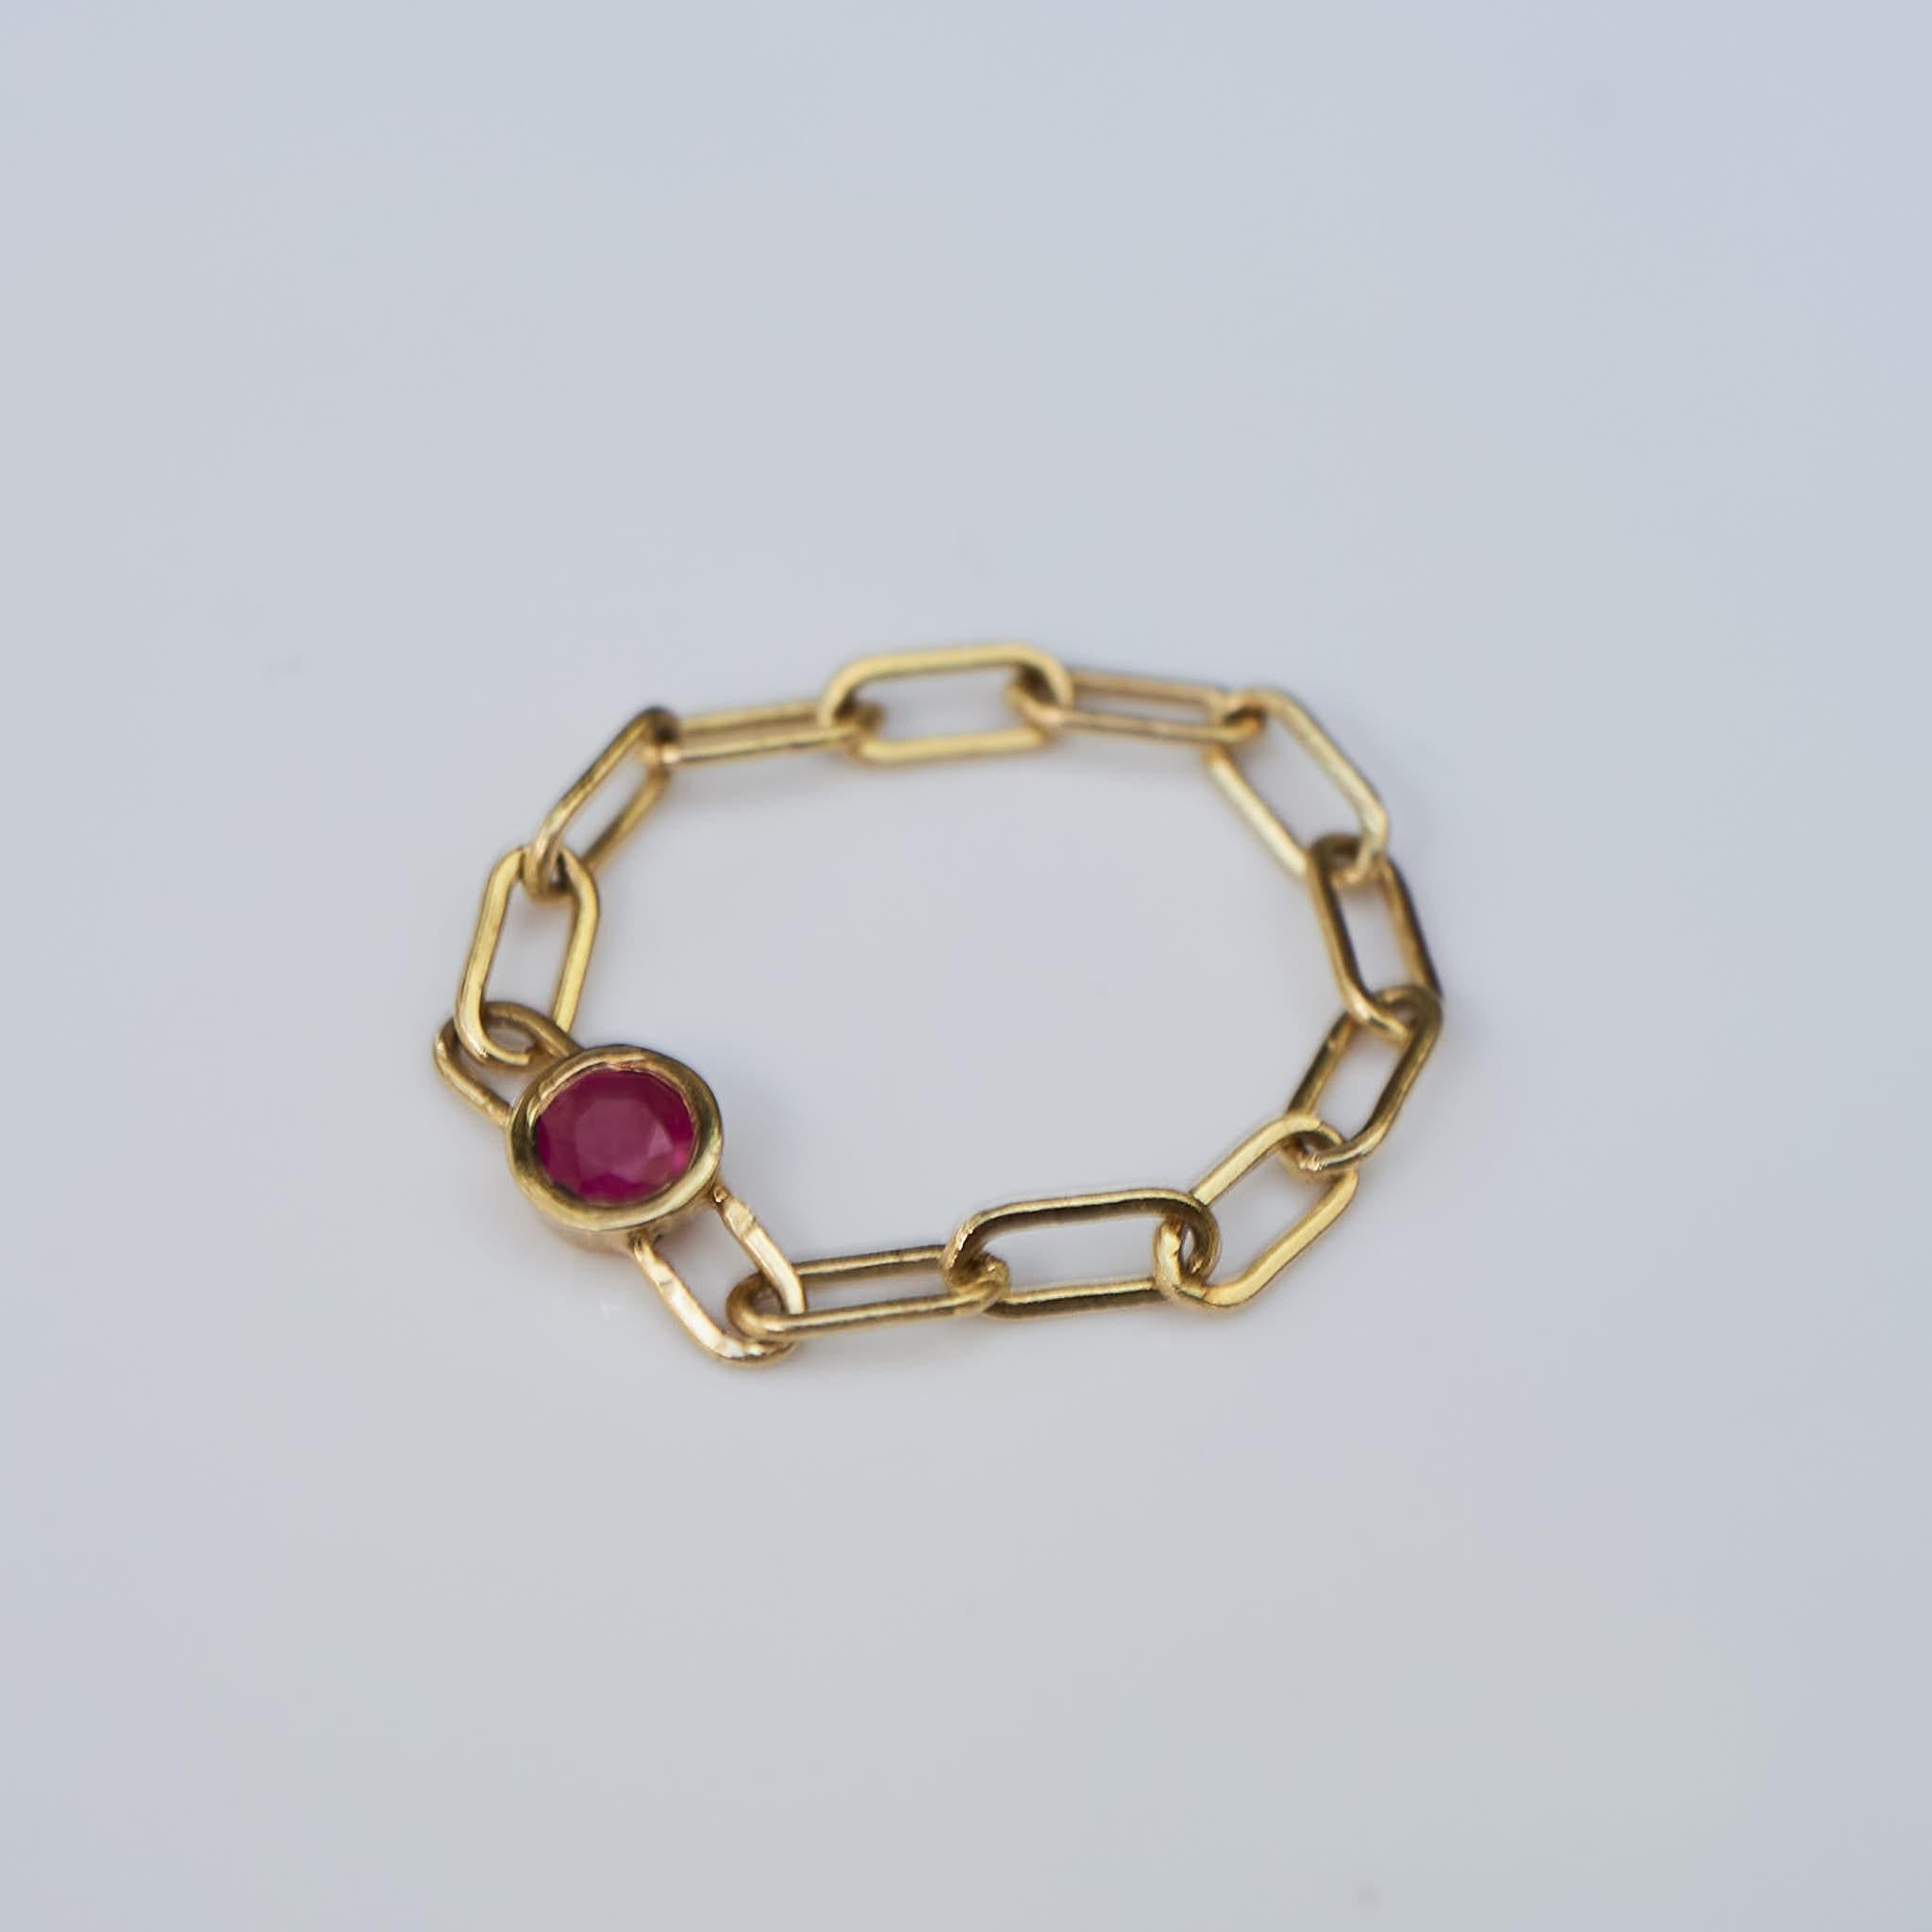 Stack Gold Chain Ring Pink Tourmaline 14K J Dauphin

Made in Los Angeles

Available for immediate delivery

Can be custom made in any size, with various gems: Sapphire, Diamond, ruby or opal. last 4 Images show different options of gem and size